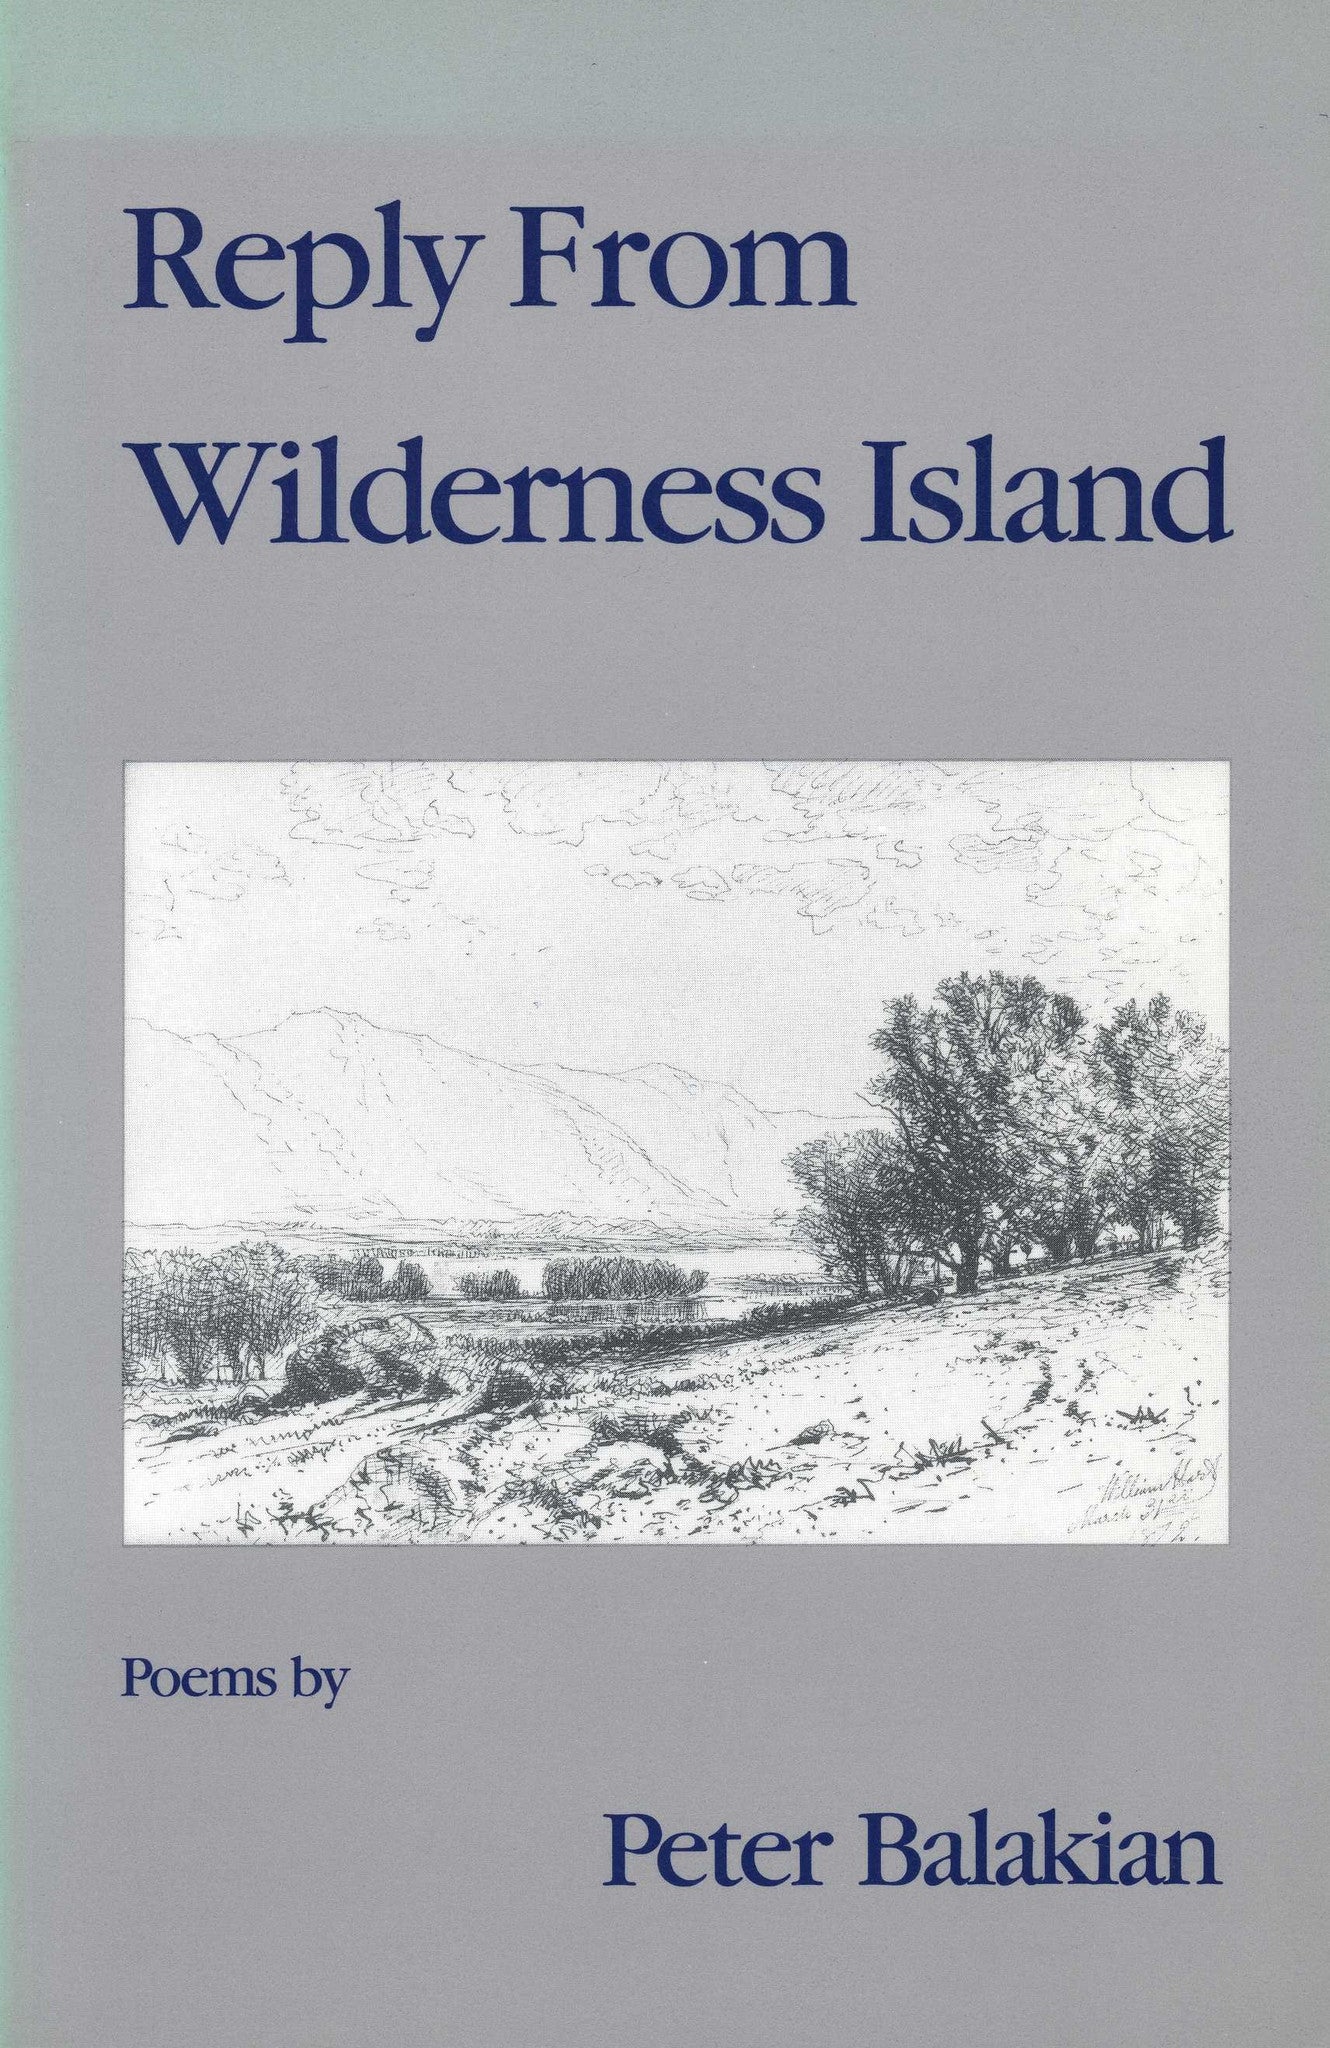 REPLY FROM WILDERNESS ISLAND: Poems